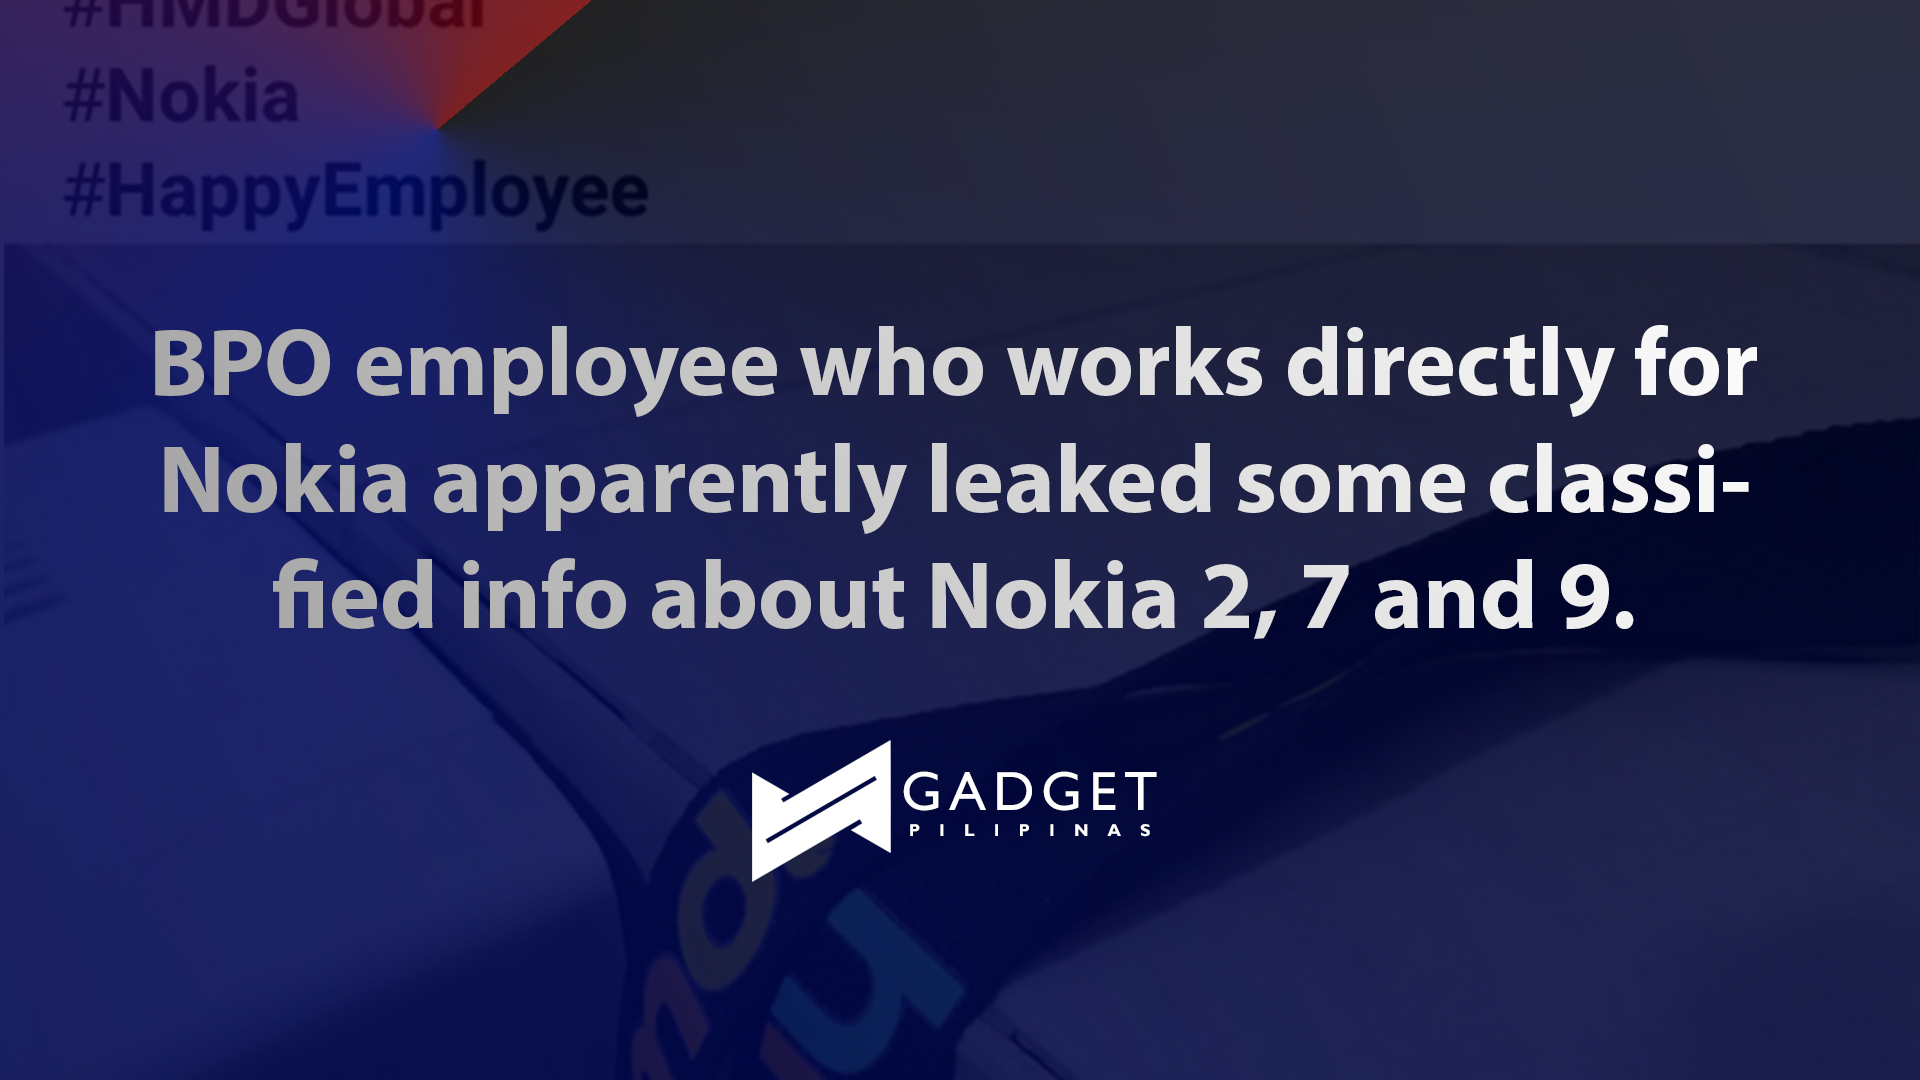 Are Nokia 2, 7 and 9 really going to see the light of day? BPO employee who works directly for Nokia apparently leaked some classified info.